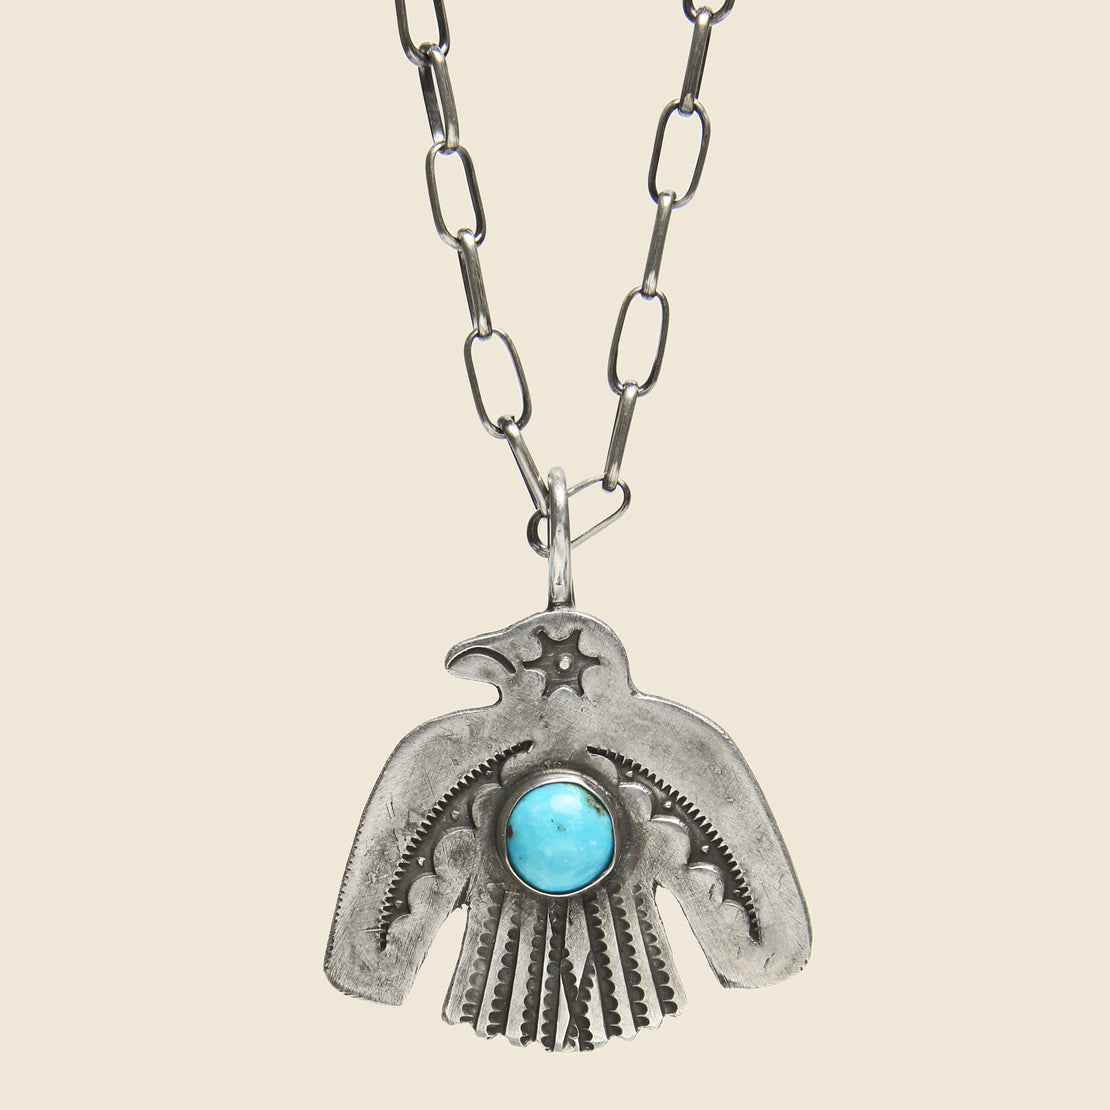 Smith Bros. Trading Co. Thunderbird Pendant Necklace - Sterling/Turquoise